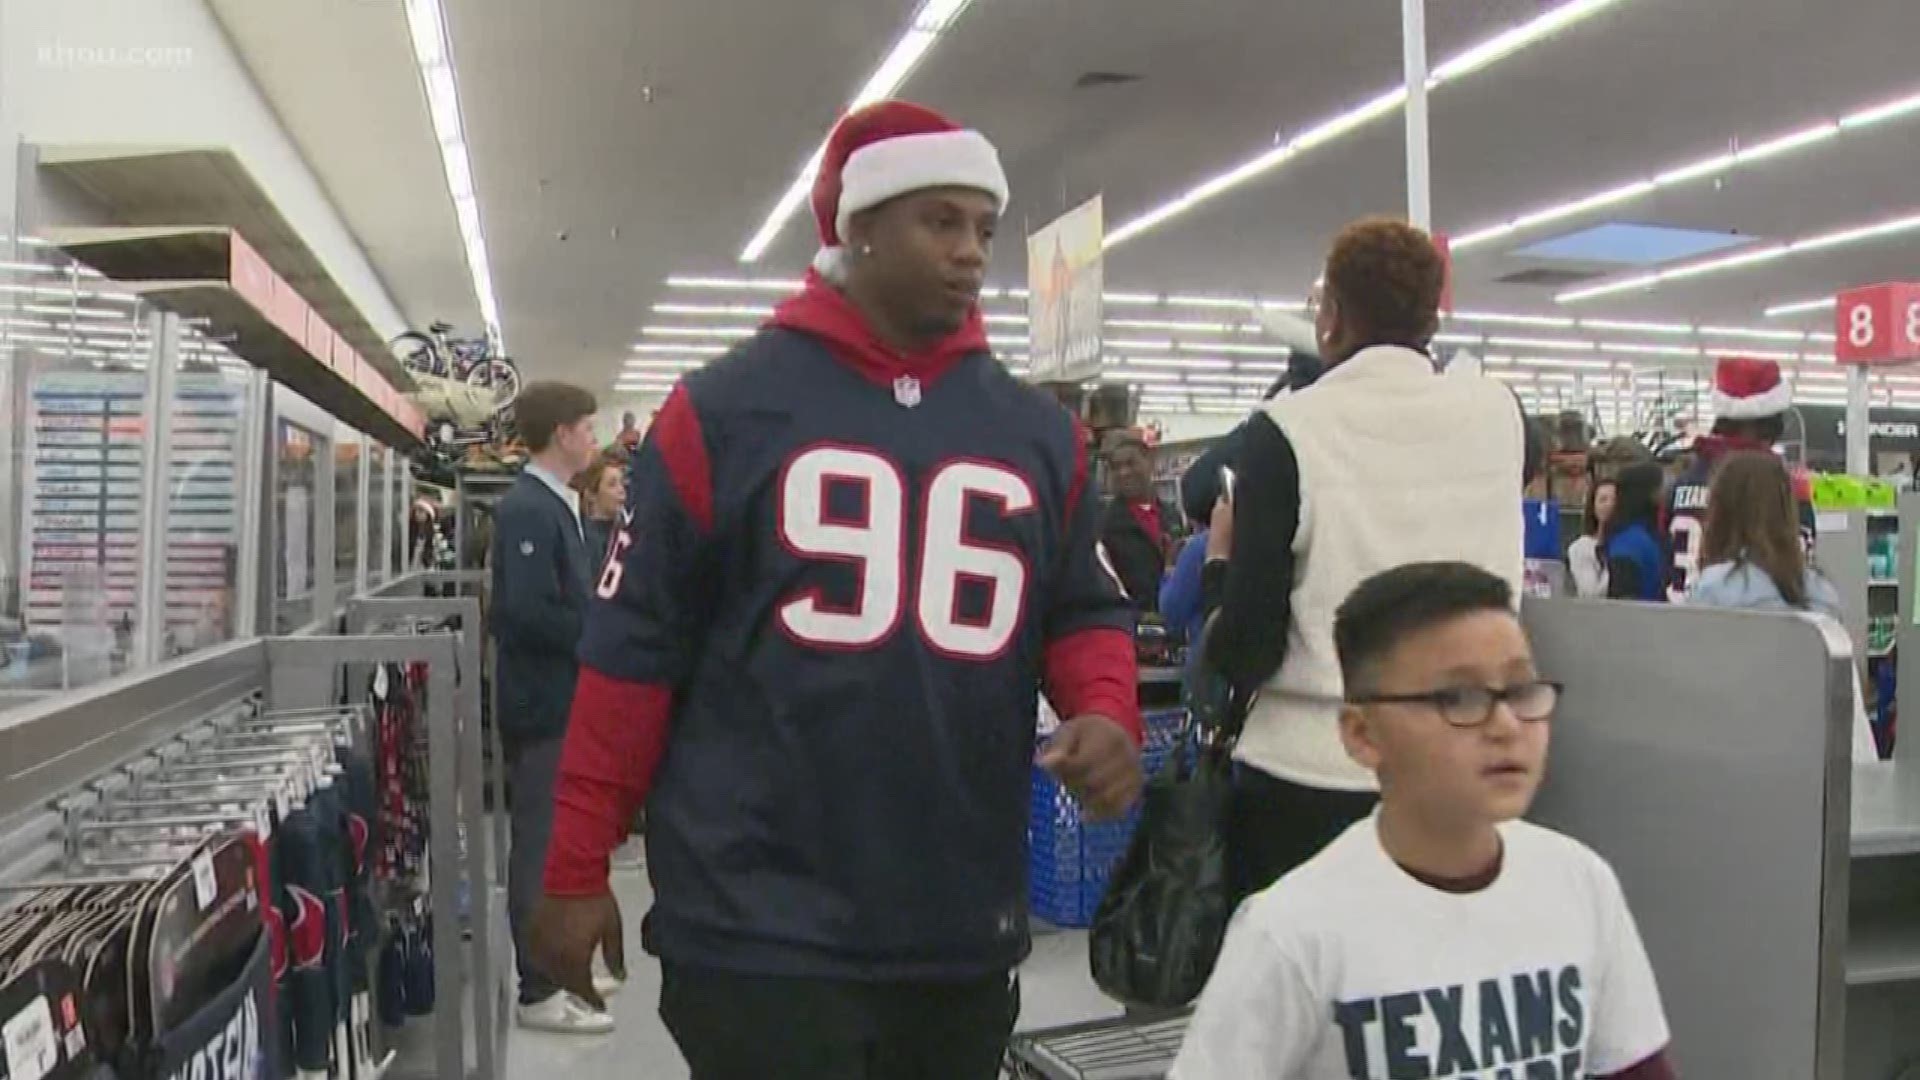 Texans rookies took 14 kids from the Boys and Girls Club and the Houston Texans YMCA to Academy for a shopping spree.